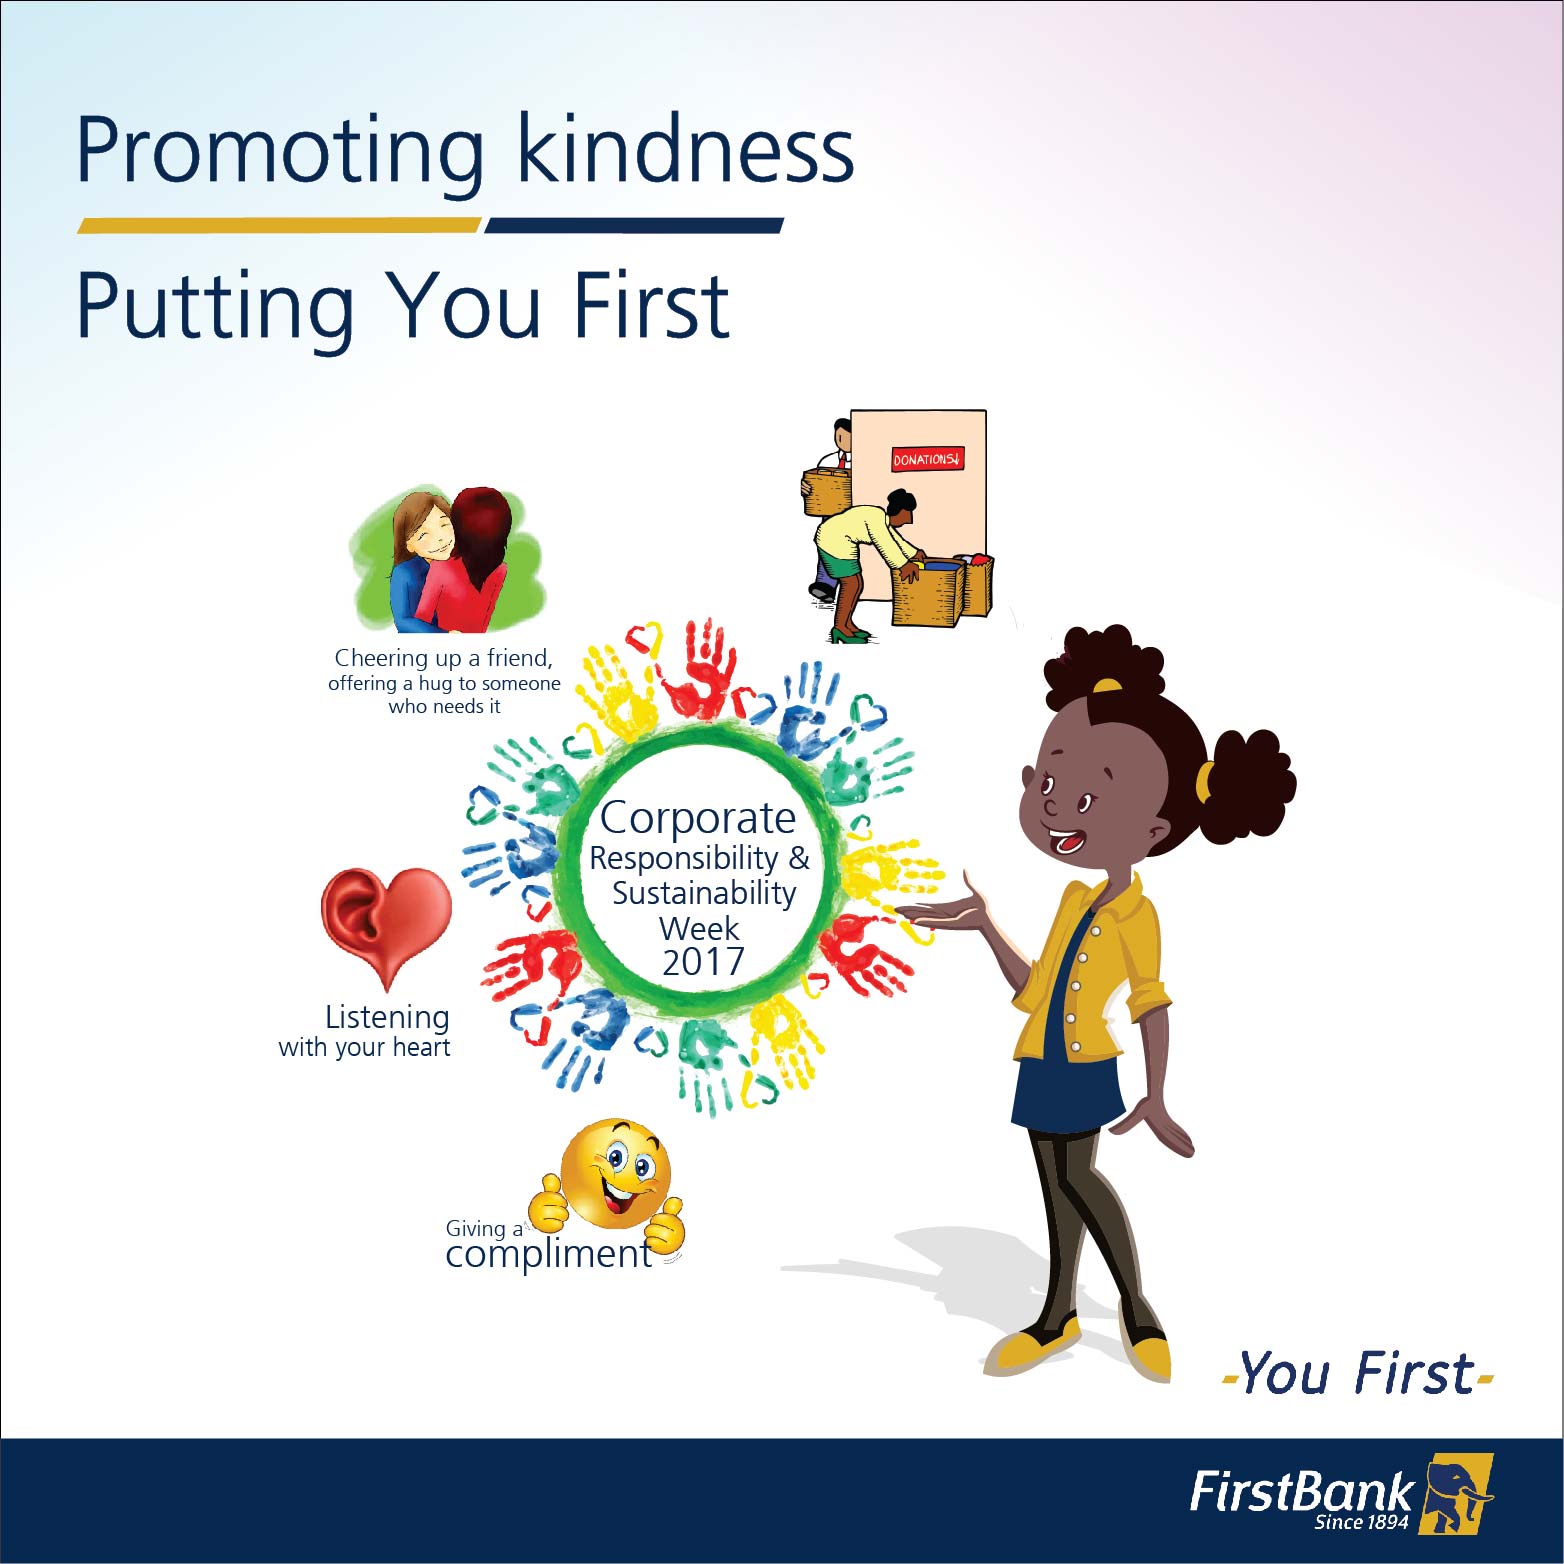 FirstBank Celebrates Corporate Responsibility and Sustainability Week: Promoting Random Acts of Kindness